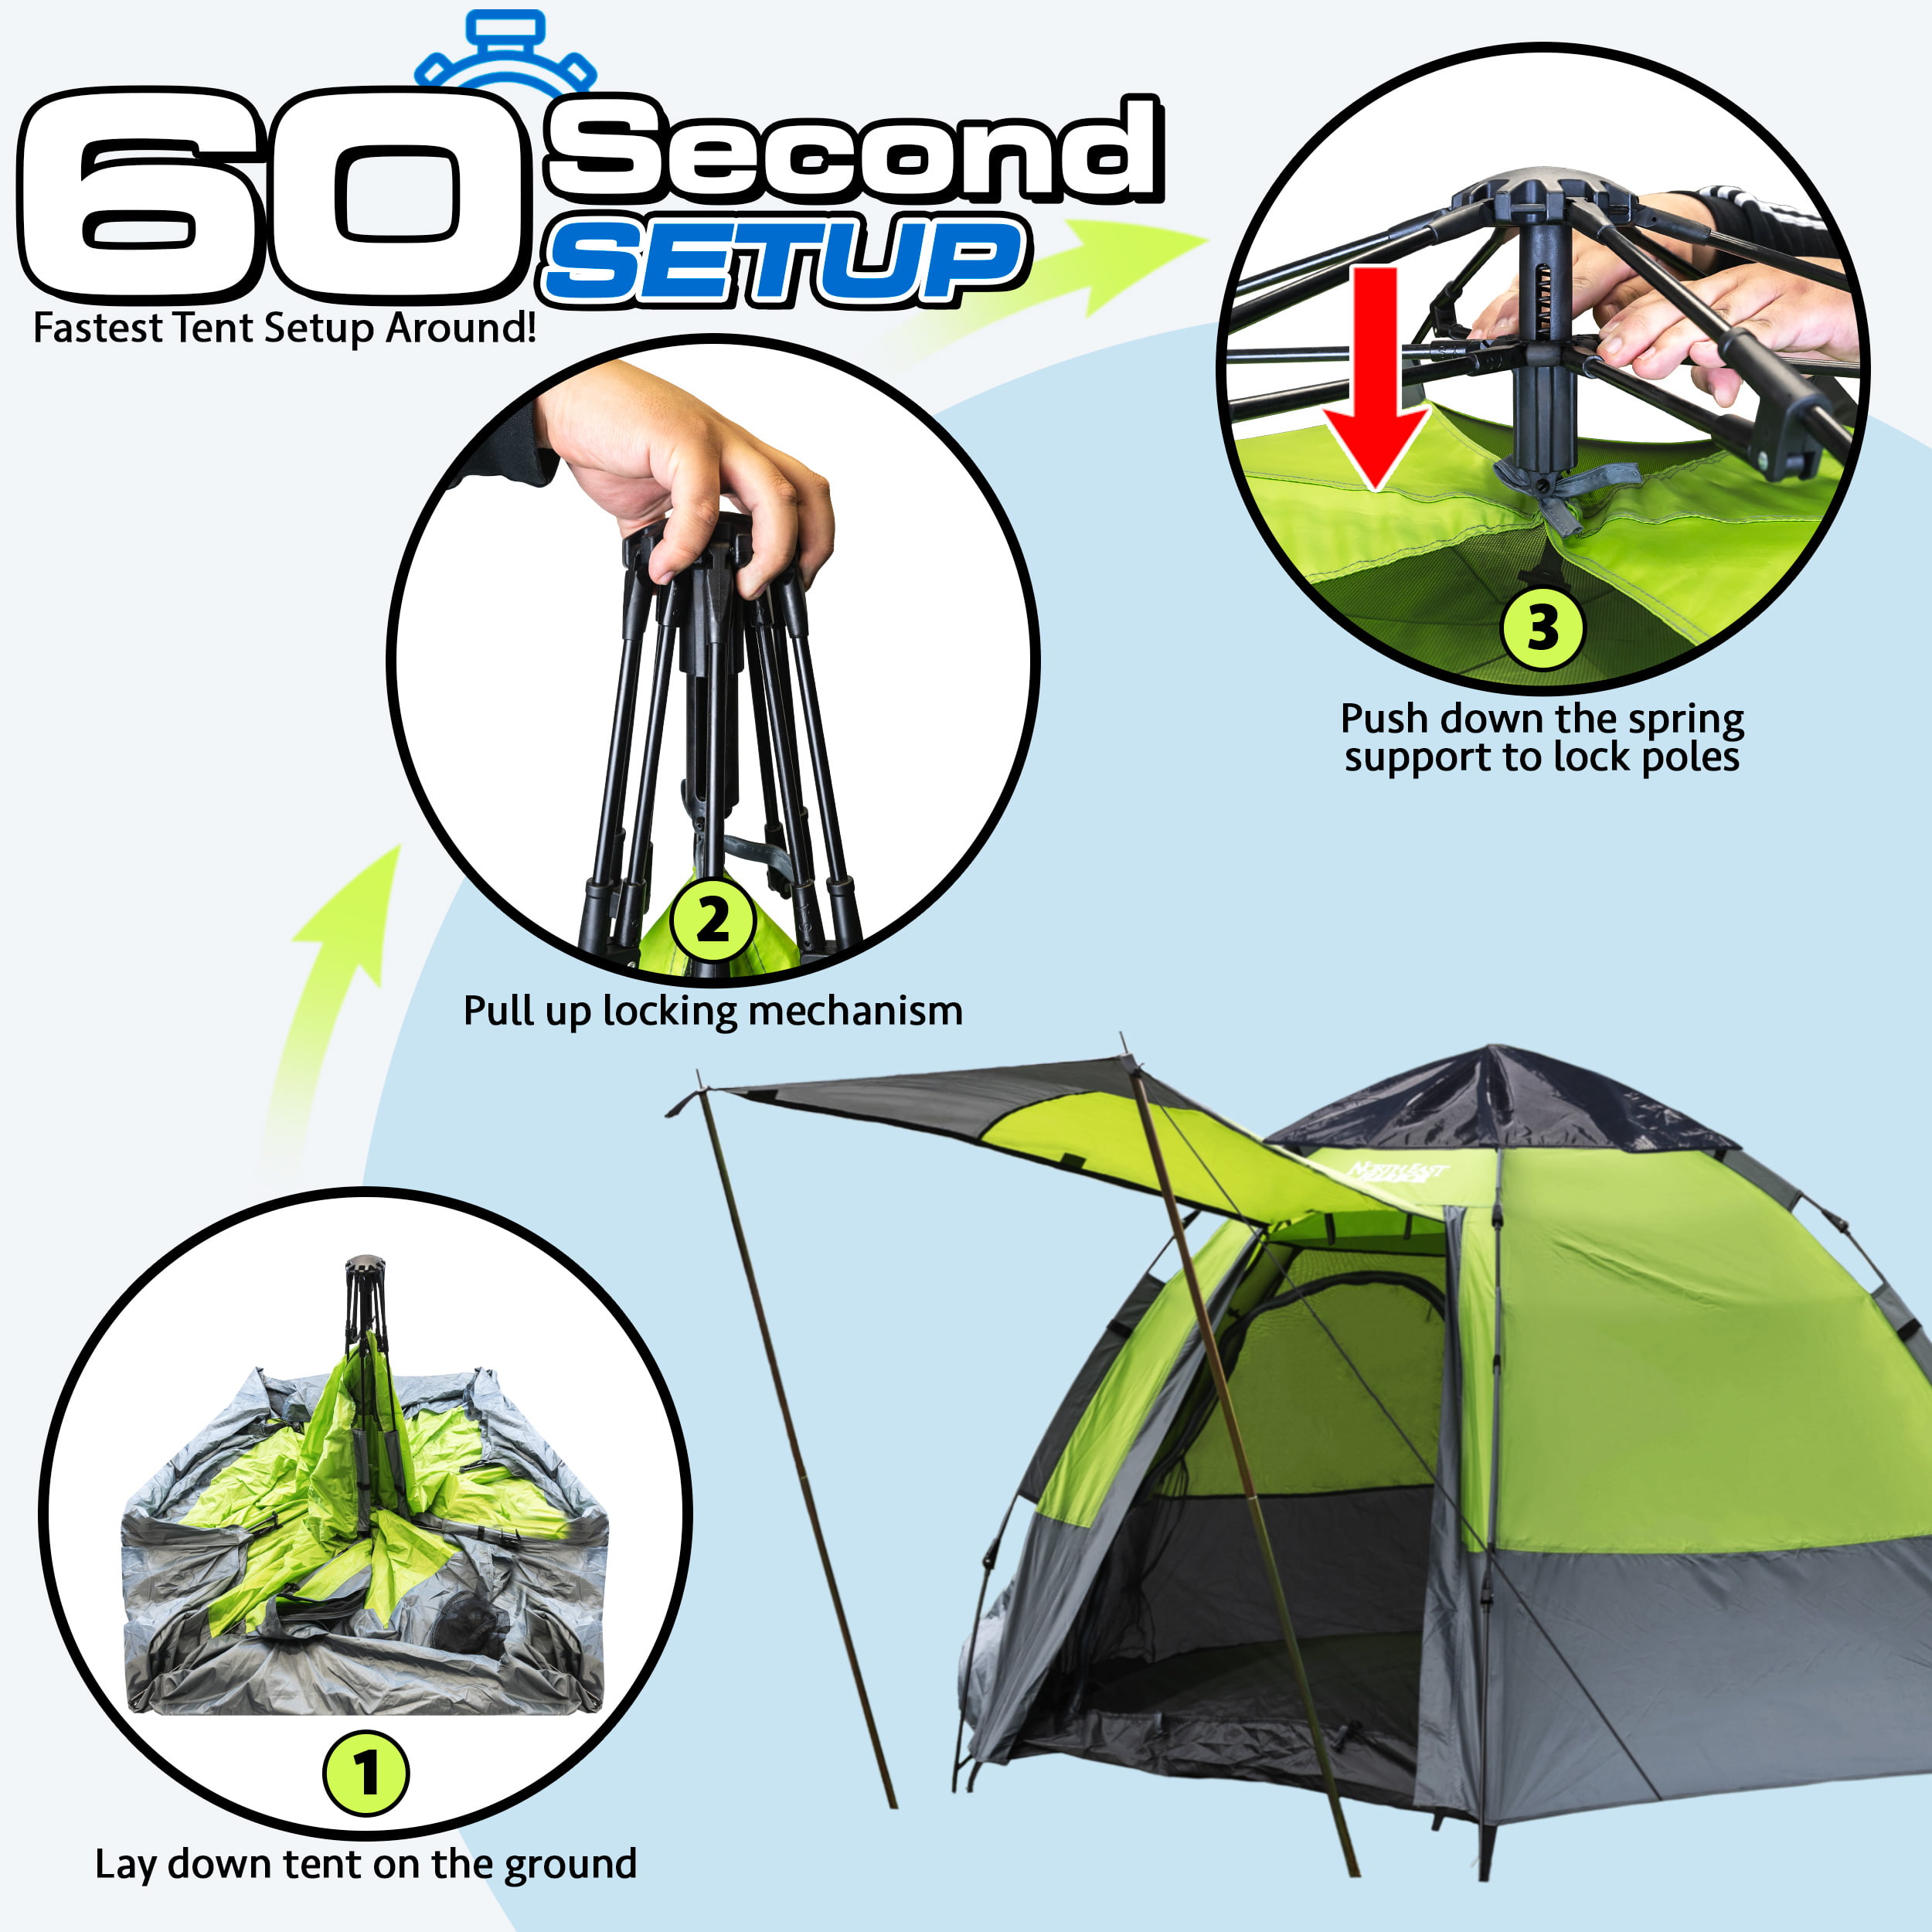 NEH 5-Person Camping Tent Instant Setup Waterproof Double Layered Material,  Green, 8.9'L x 8.9'W x 5.25'H, Portable Carry Bag Included 